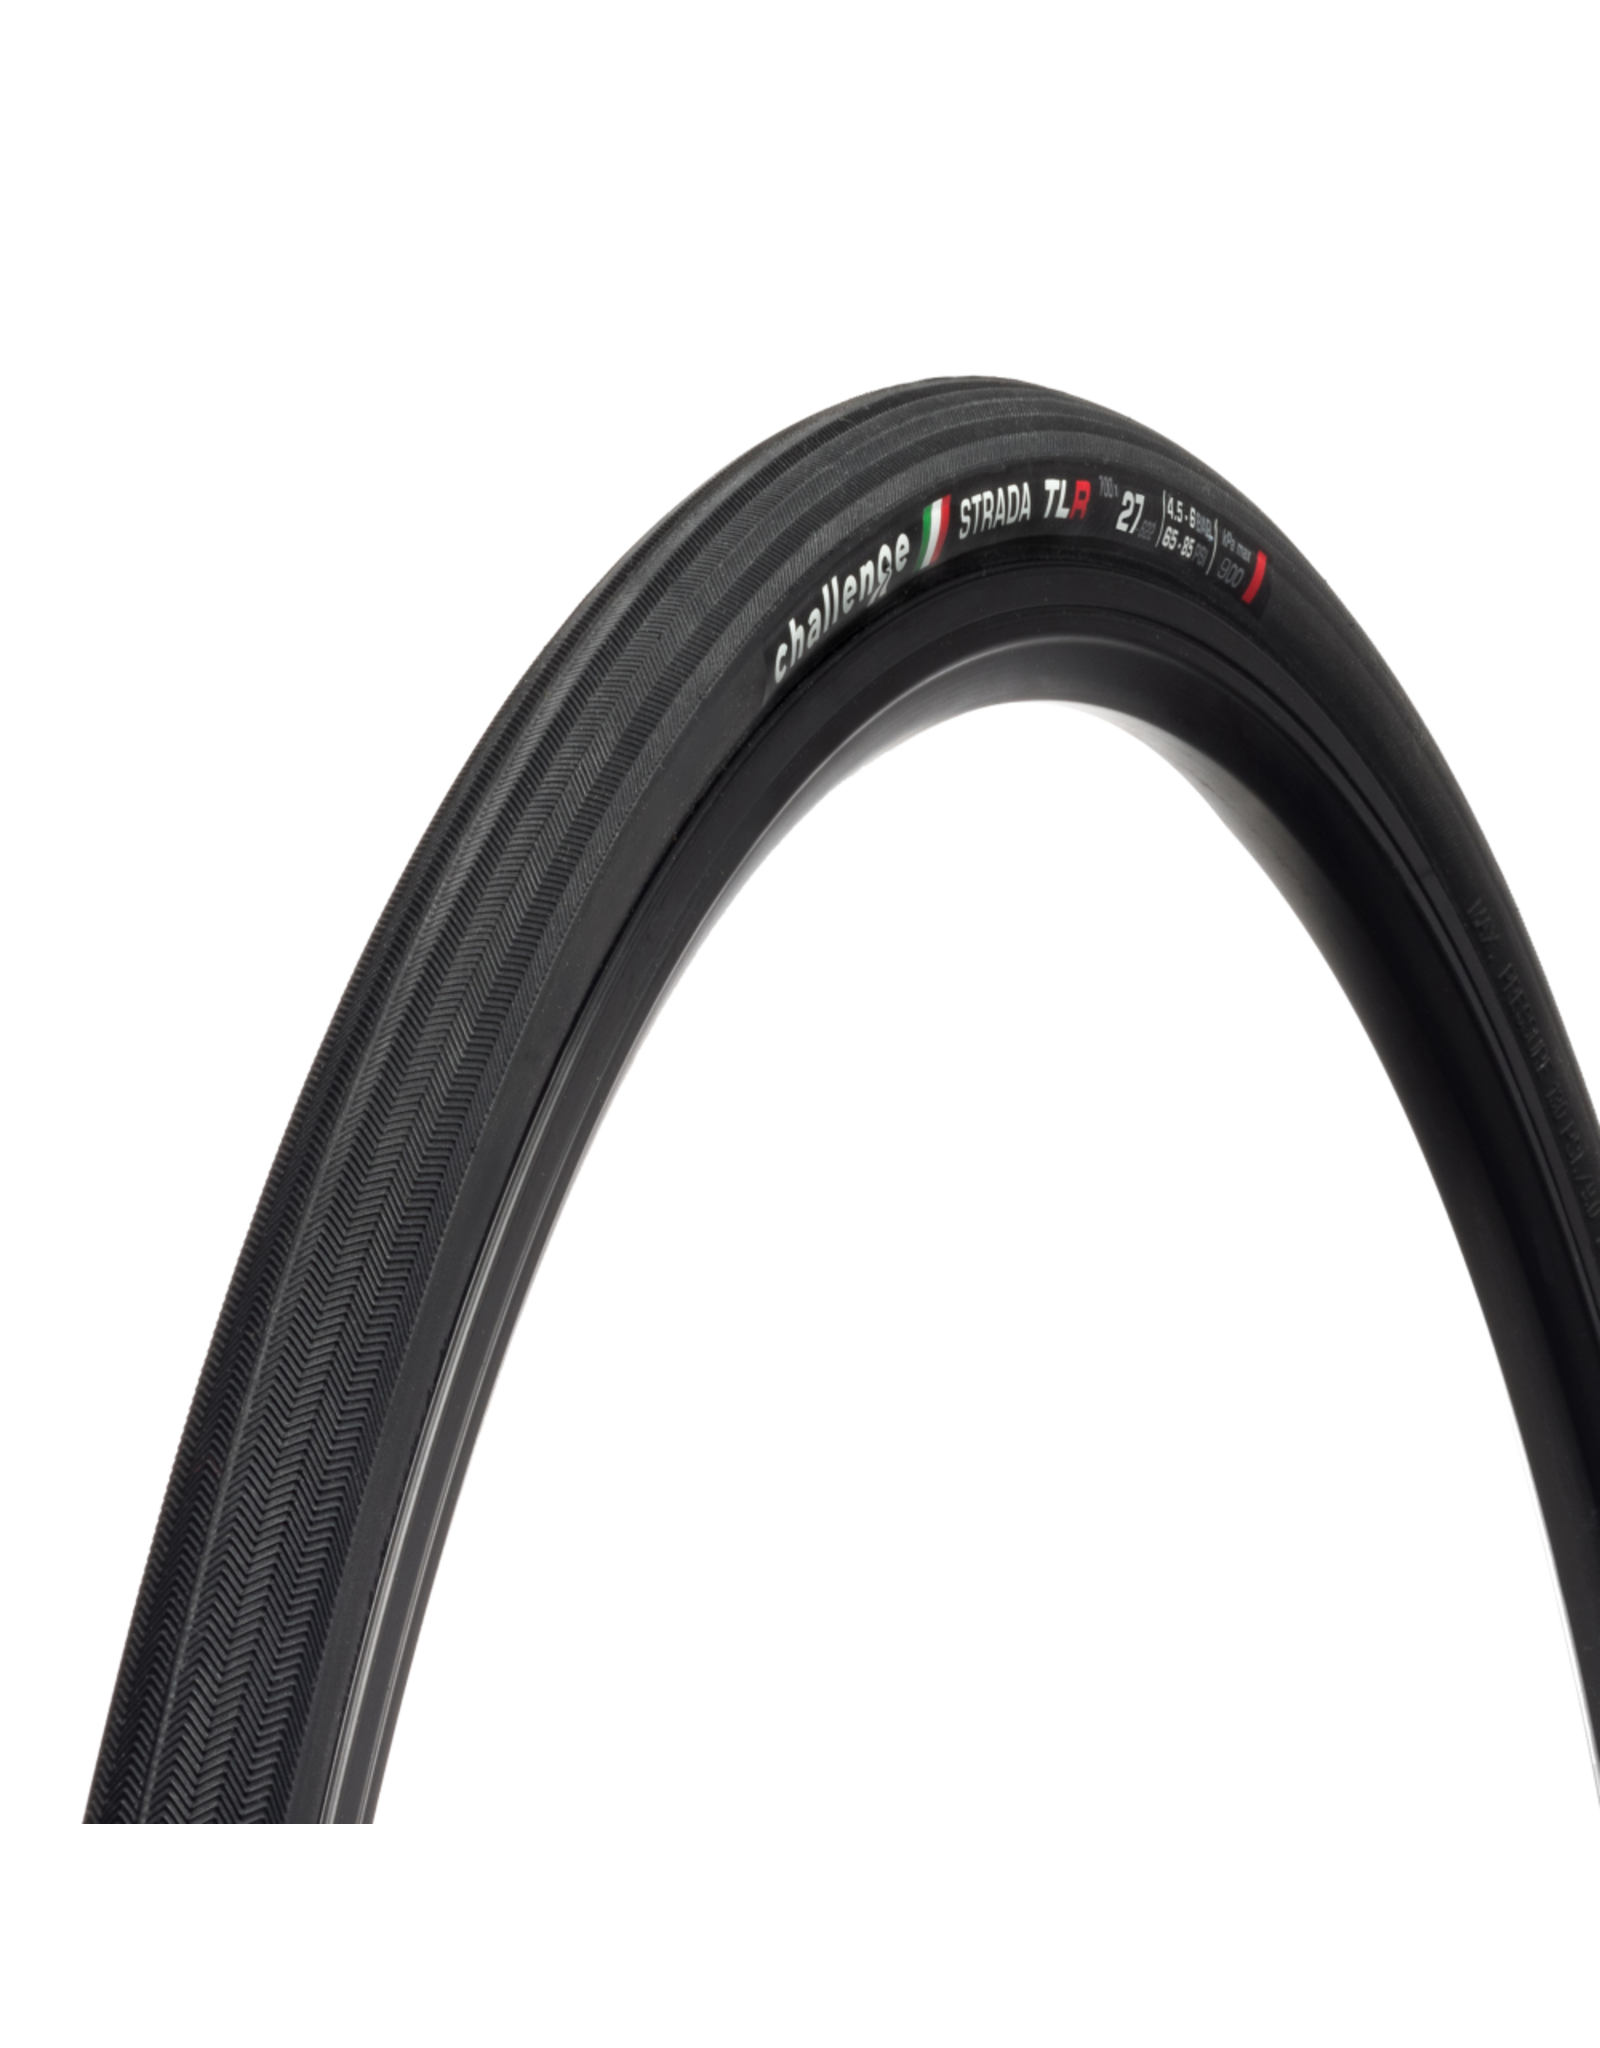 Challenge Tire Challenge Strada Race TLR Tubeless Ready Tire 700 x 27 120TPI Black